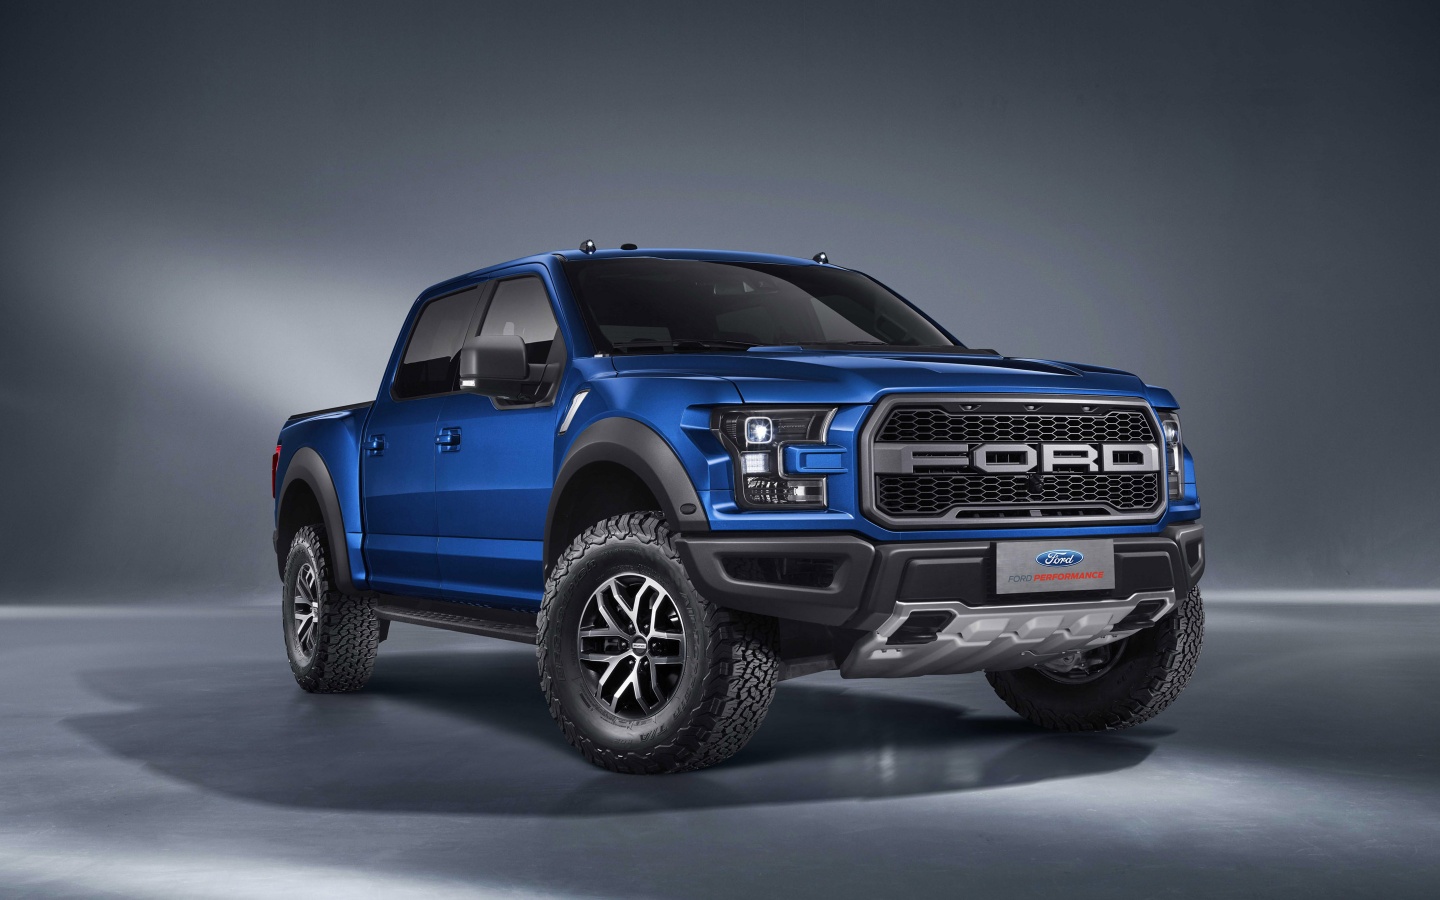 2017 Ford F 150 Raptor Supercrew Wallpapers In Jpg Format For Free Download